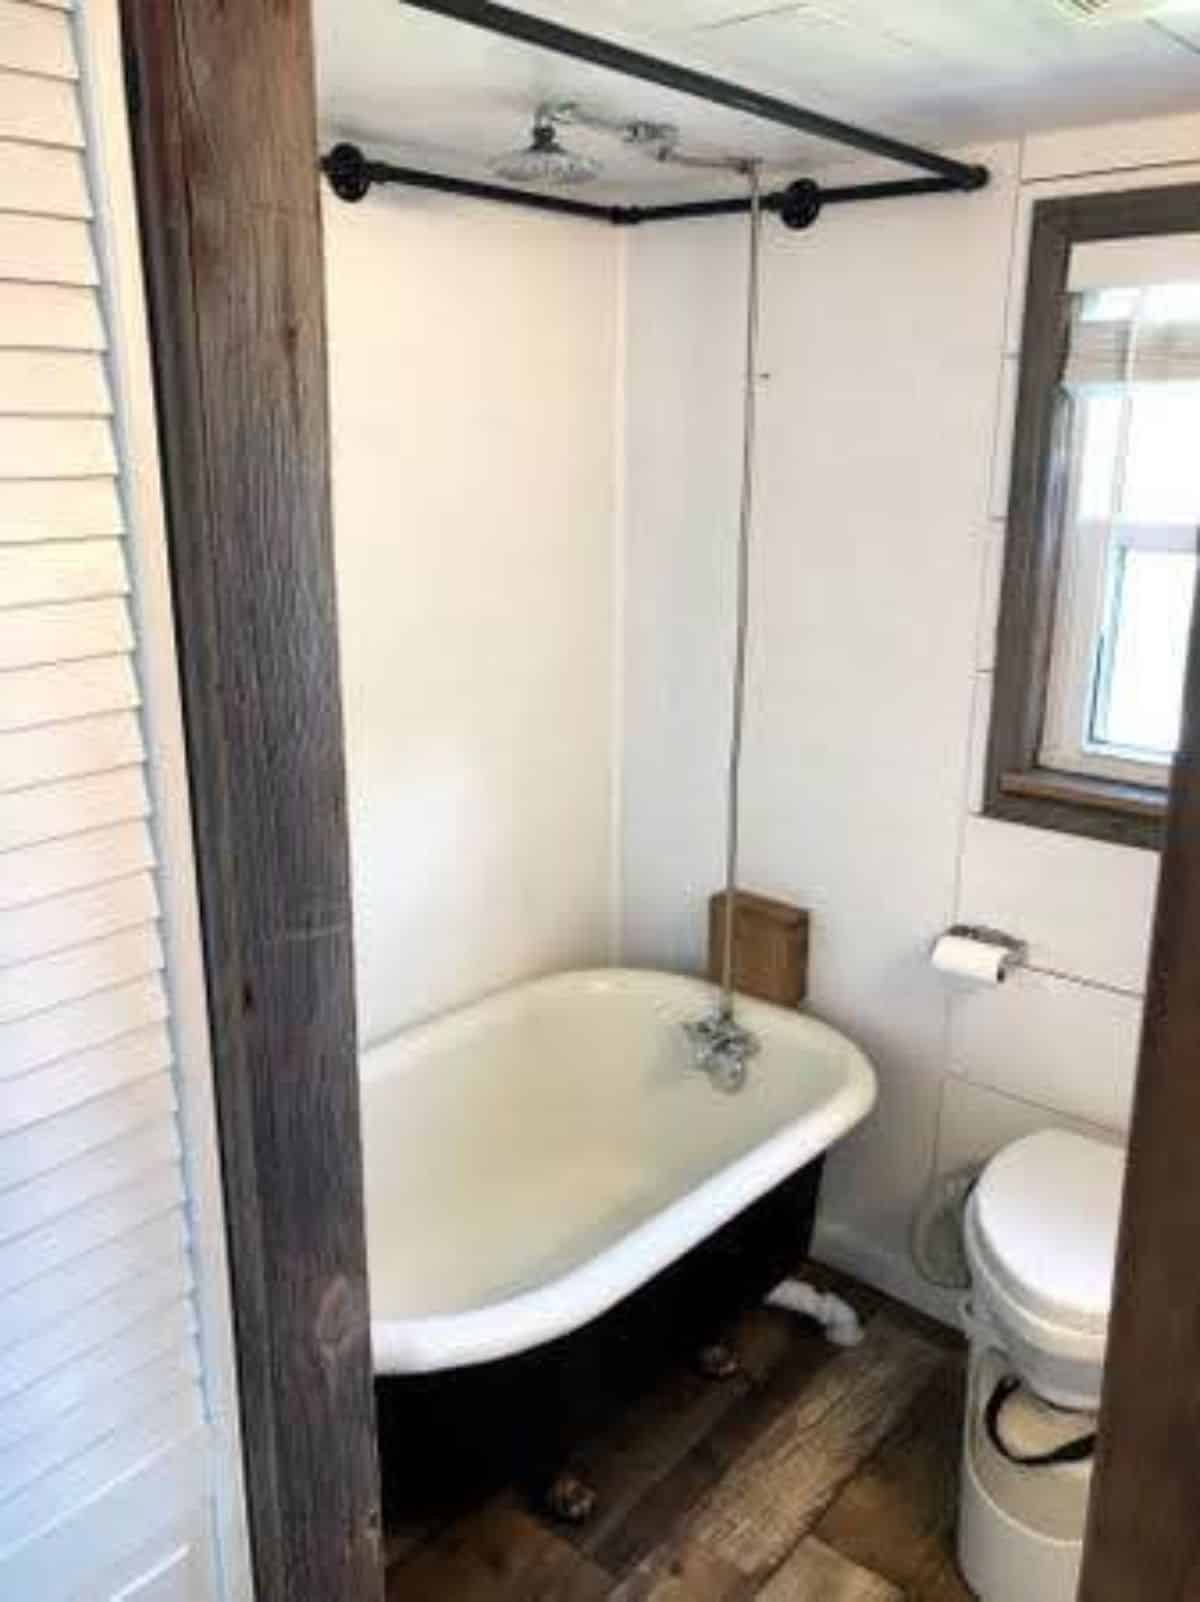 composting toilet and a bathtub in bathroom of 24' fully furnished tiny home